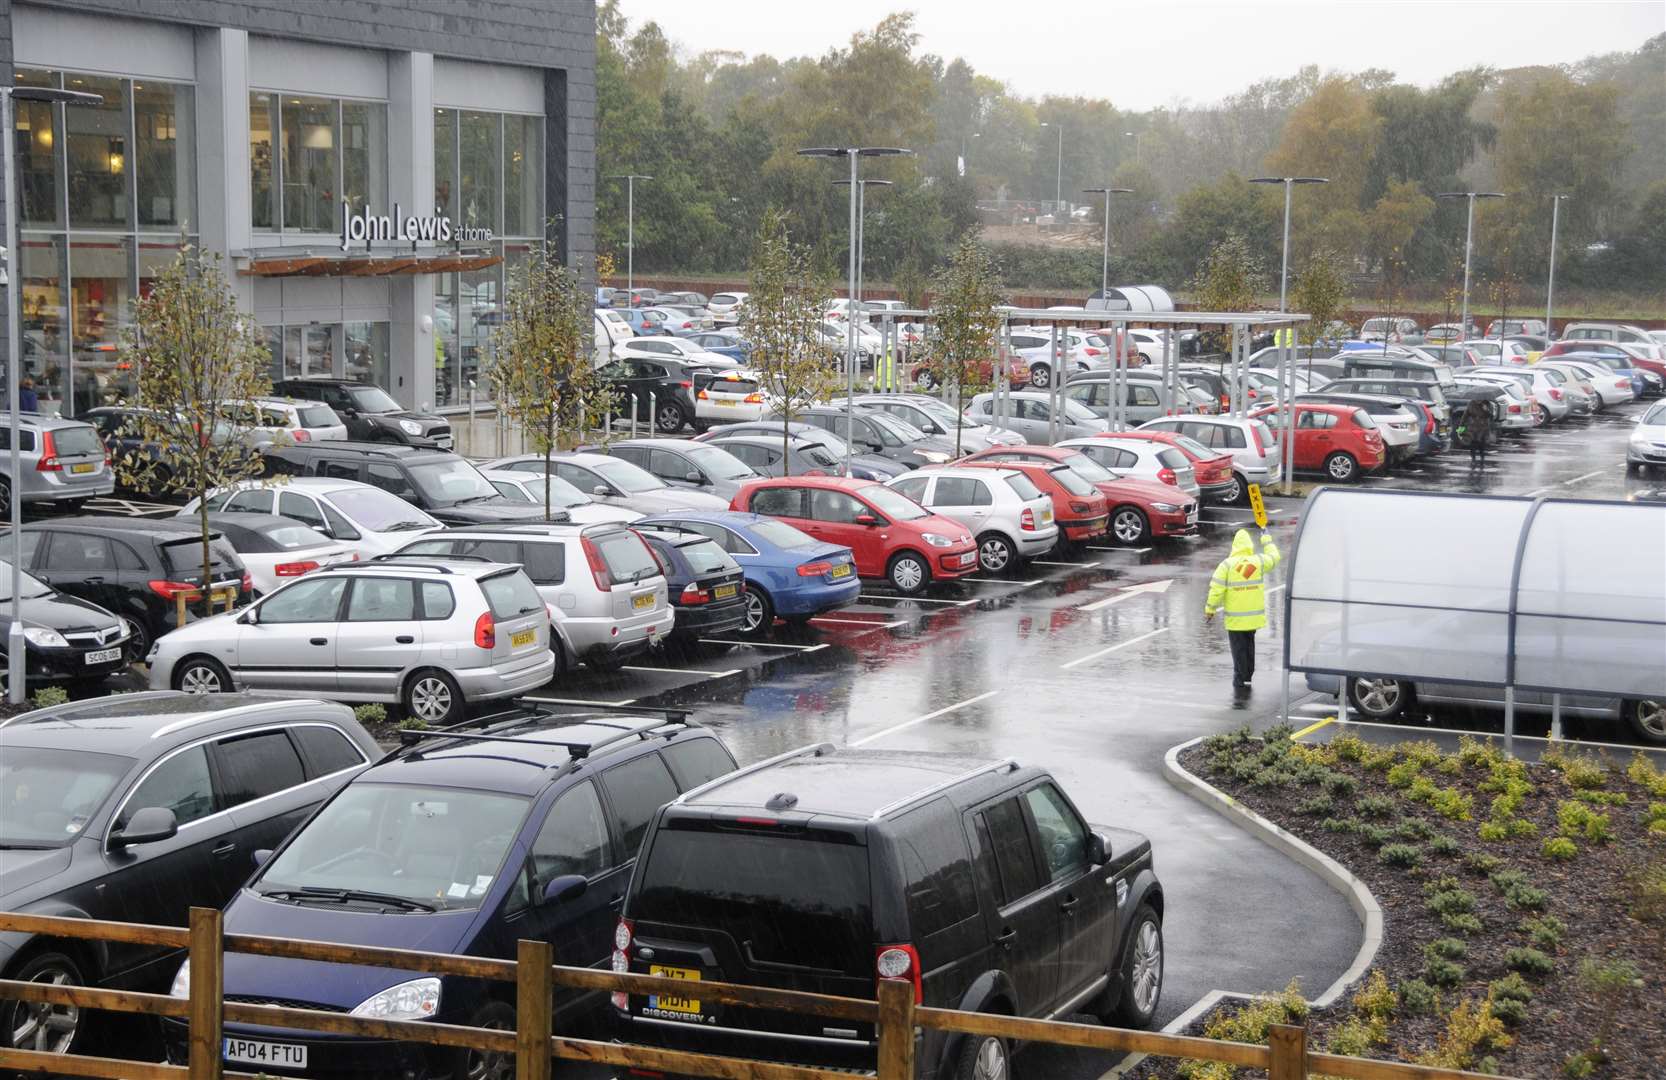 Part of the car park will be lost for the garden centre, but it will still feature 183 spaces